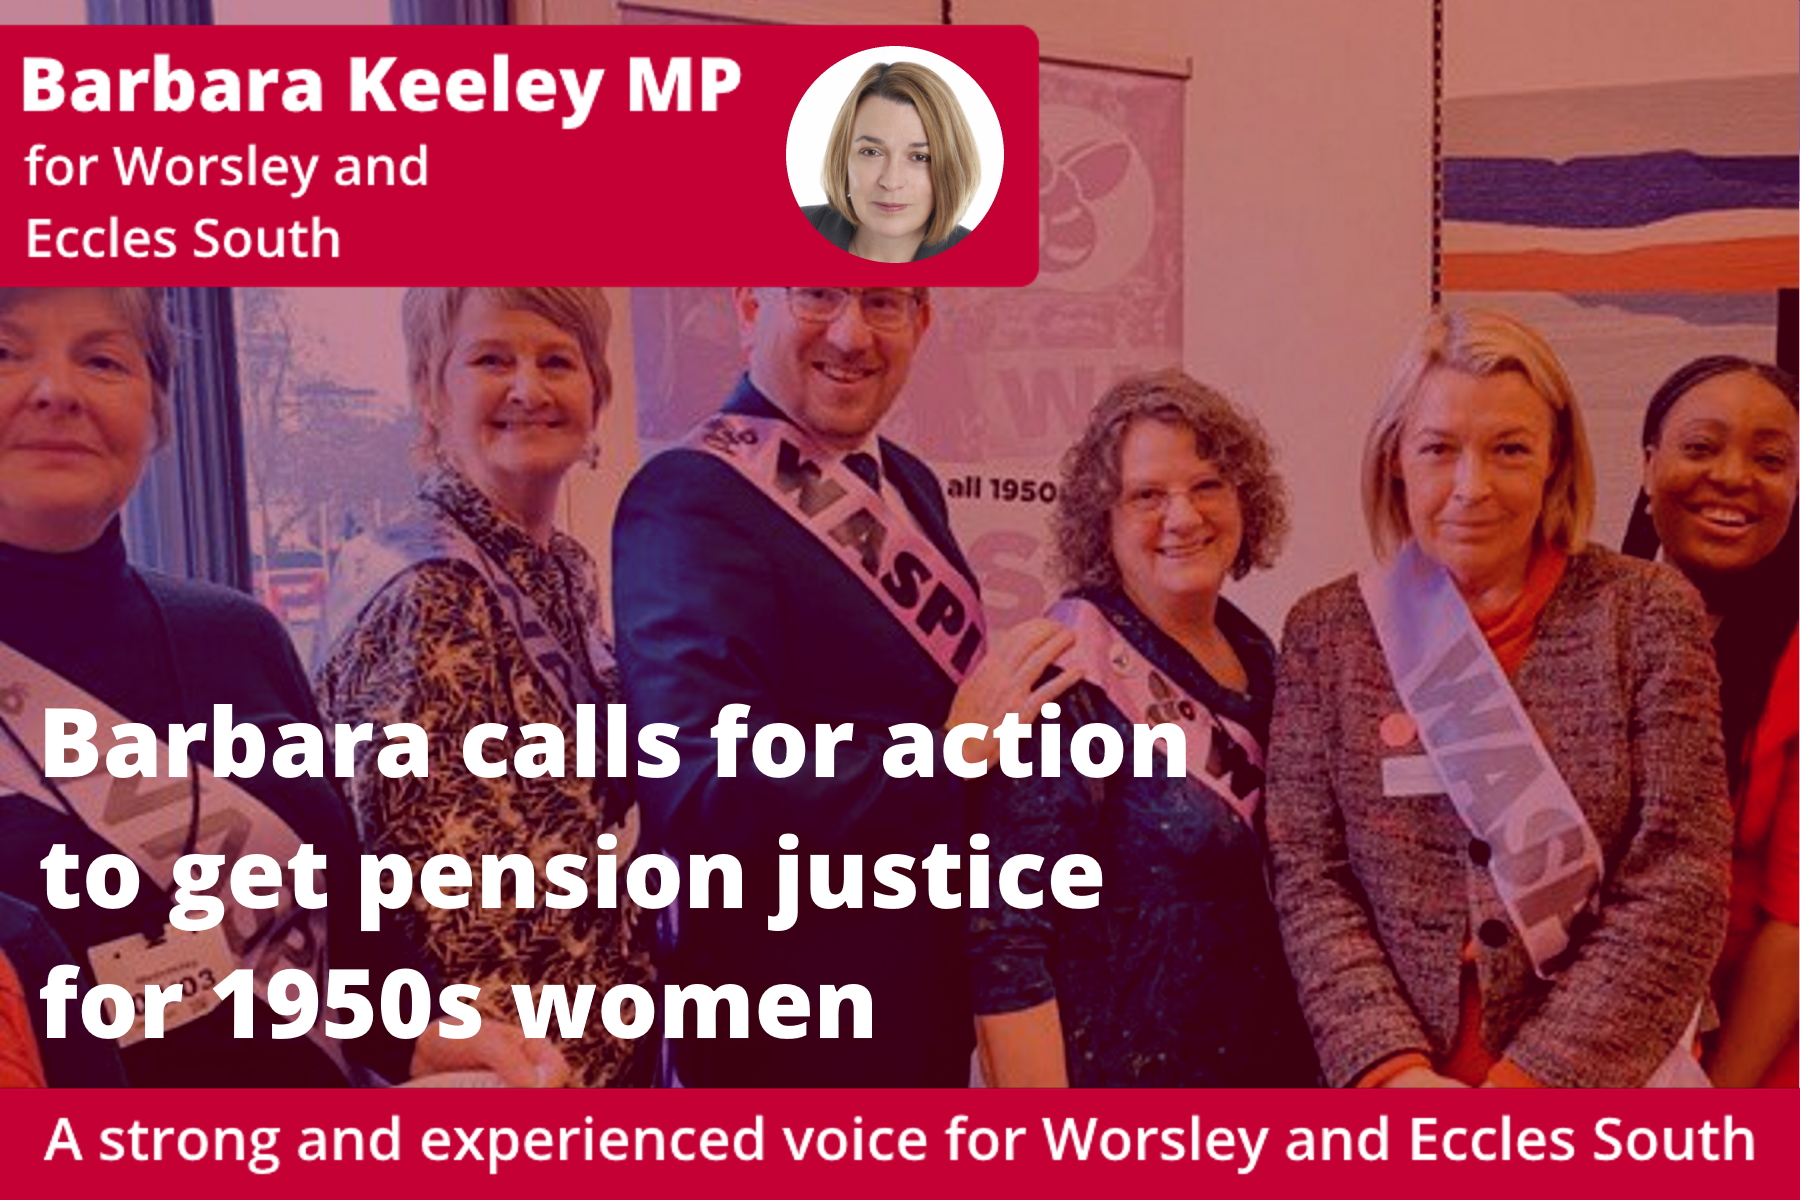 Barbara calls for action to get pension justice for 1950s women